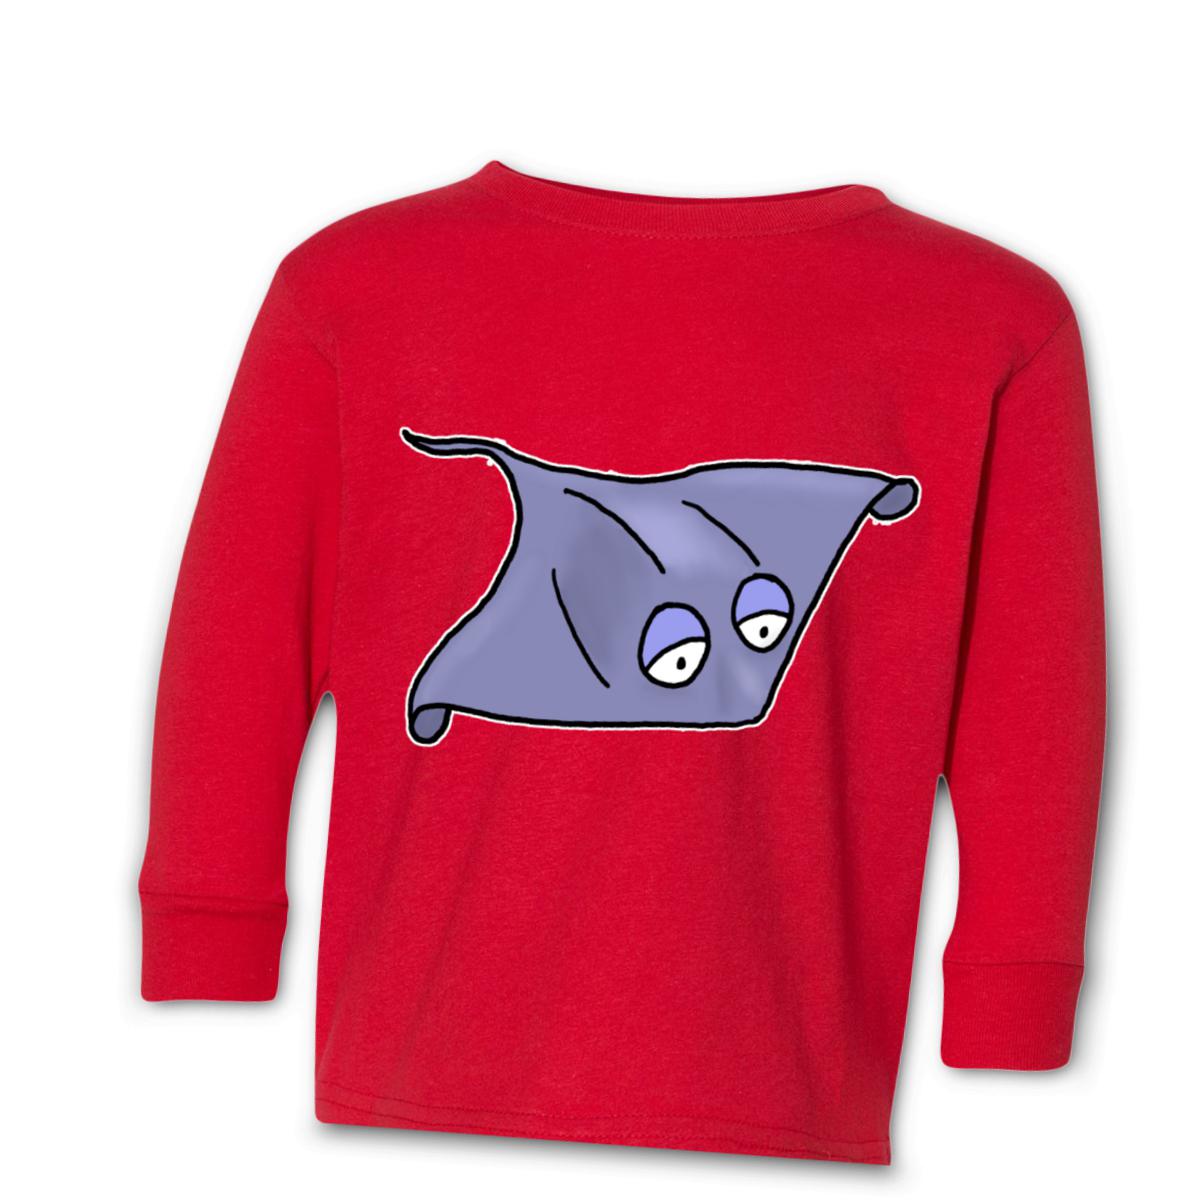 Stingray Toddler Long Sleeve Tee 56T red